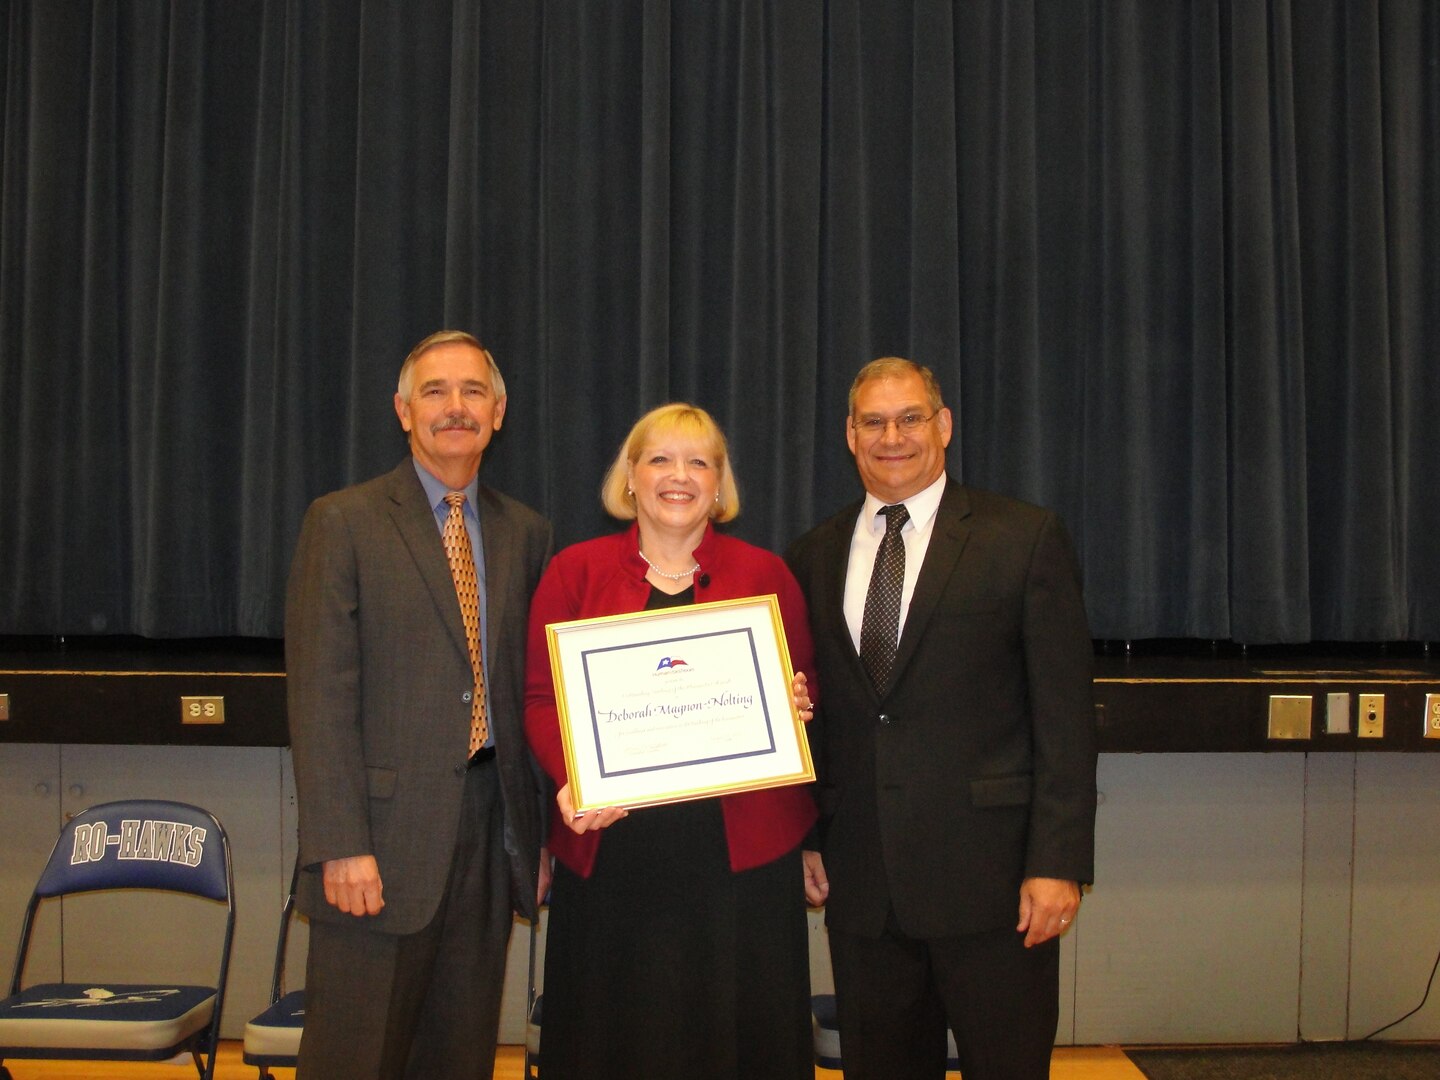 Billy Walker (left), Randolph Field Independent School District superintendent, and Miles Cabra (right), Randolph High School principal, congratulate Deborah Magnon-Nolting, Randolph High School teacher Oct. 17 after she received the Humanities Texas Outstanding Teaching of the Humanities Award and a $5,000 prize. (Courtesy photo)